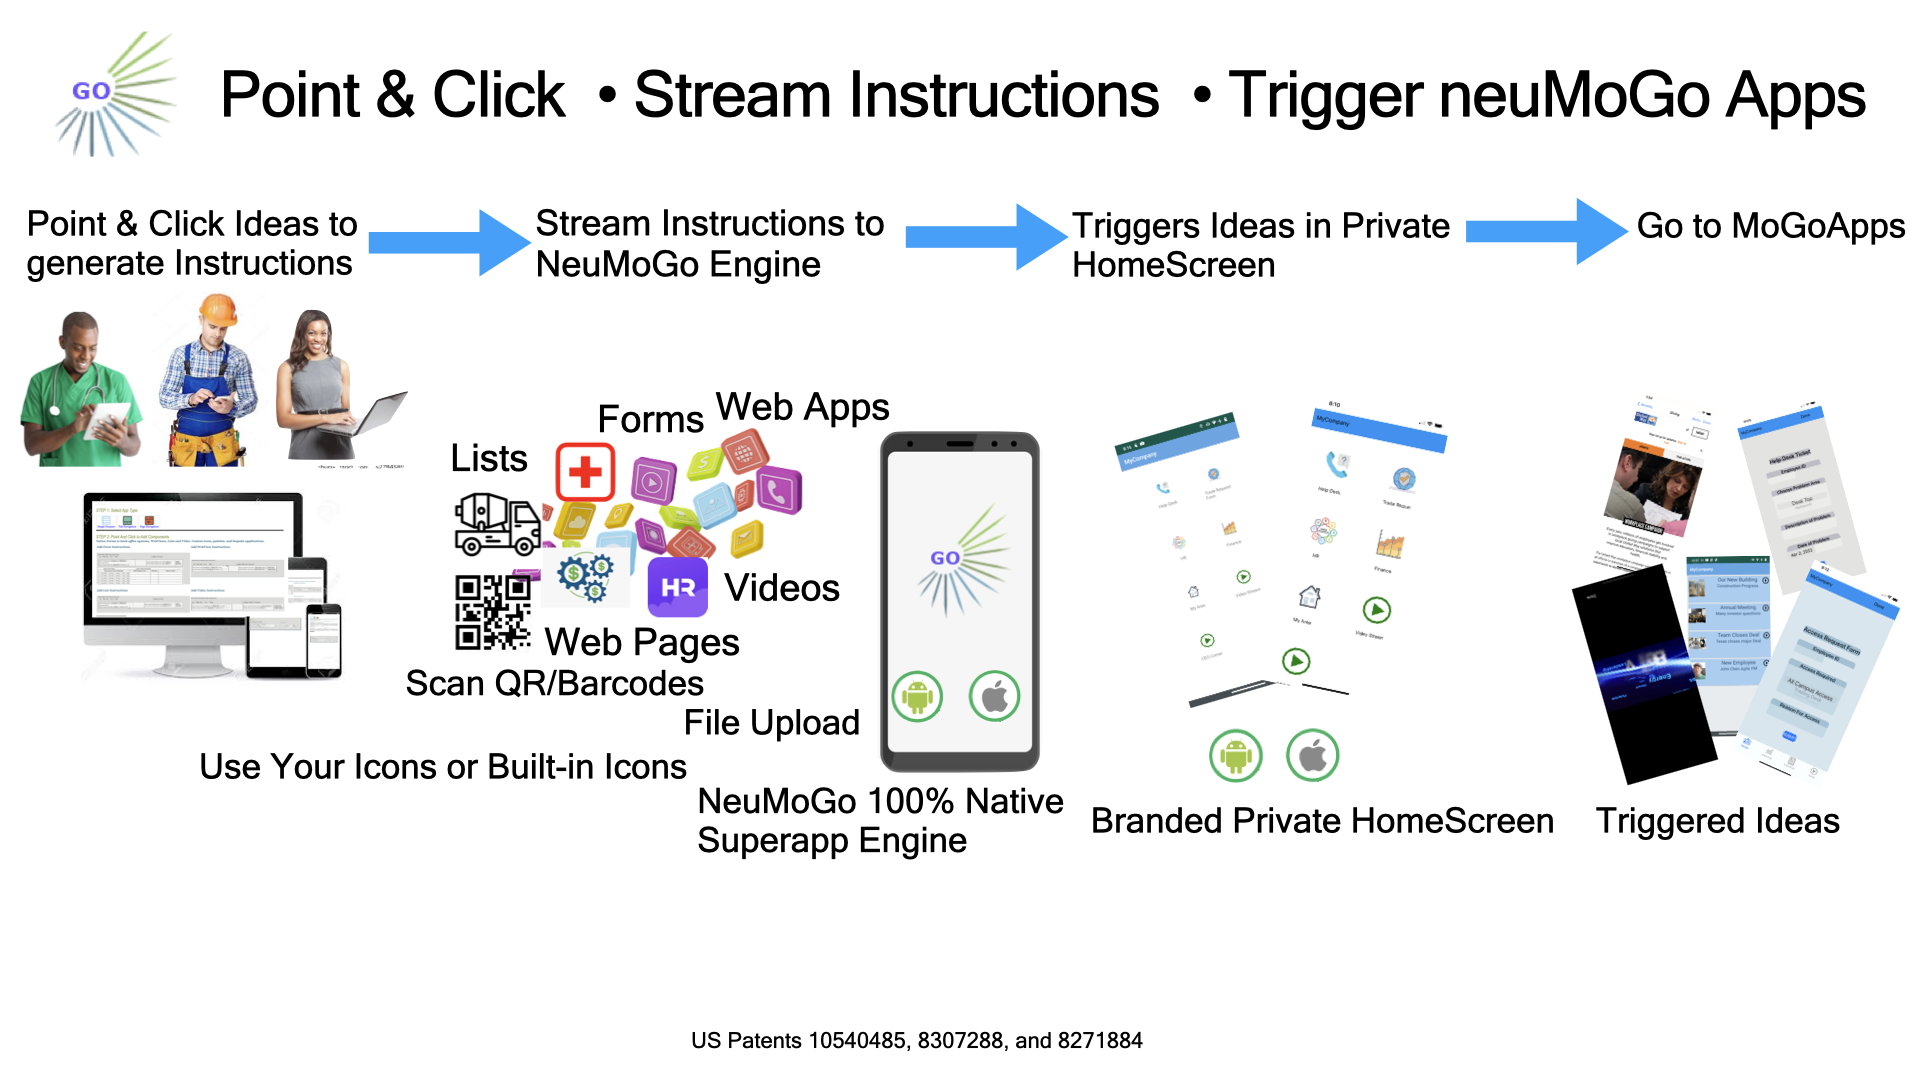 Automate streaming mobile ideas to a private HomeScreen